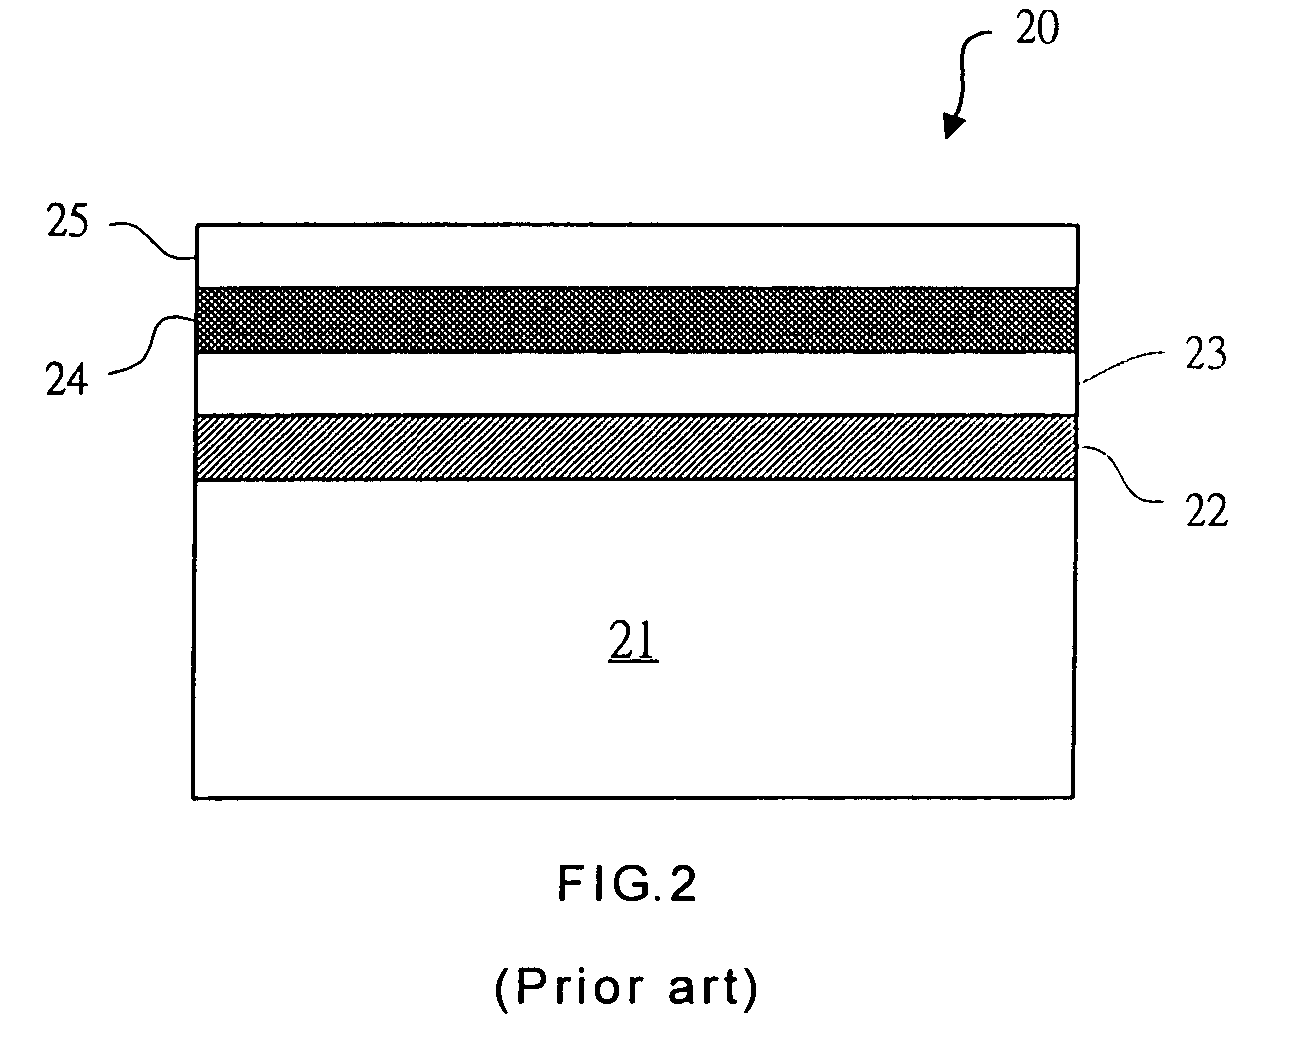 Method for fabricating a compound semiconductor epitaxial wafer